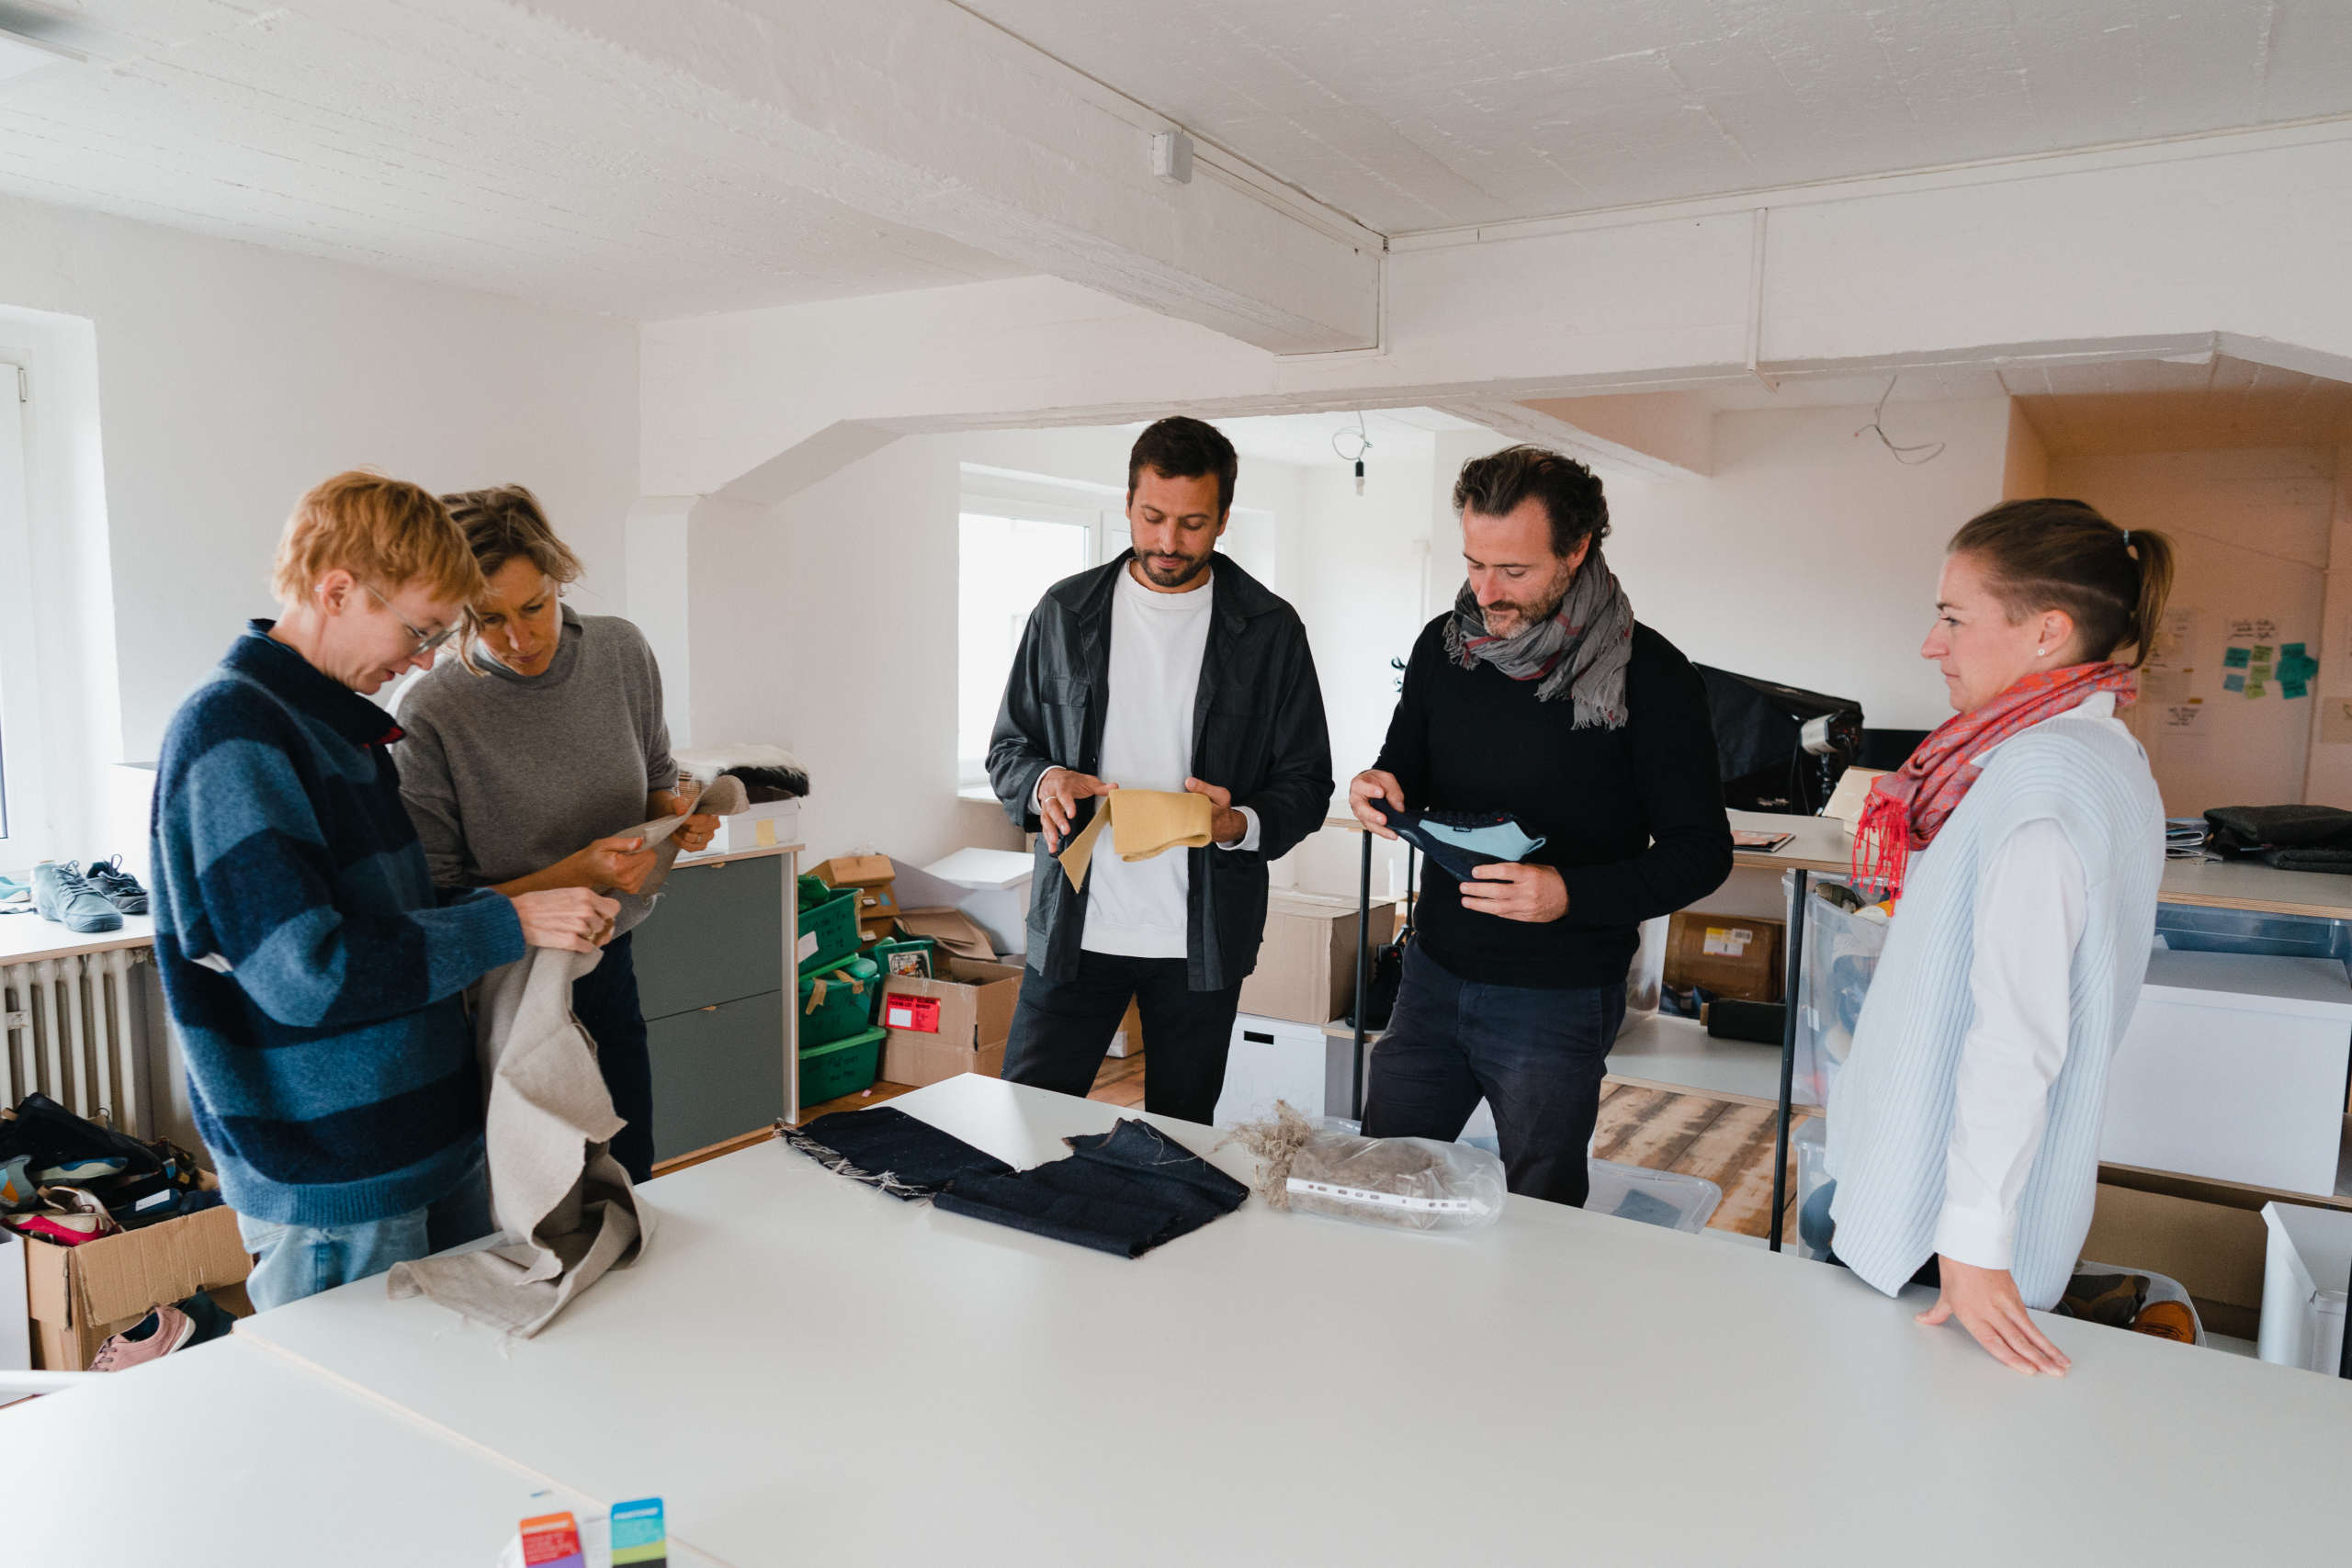 Employees of Wildling Shoes and VirgoCoop standing in a semicircle around your table in the Wildling Shoes studio.